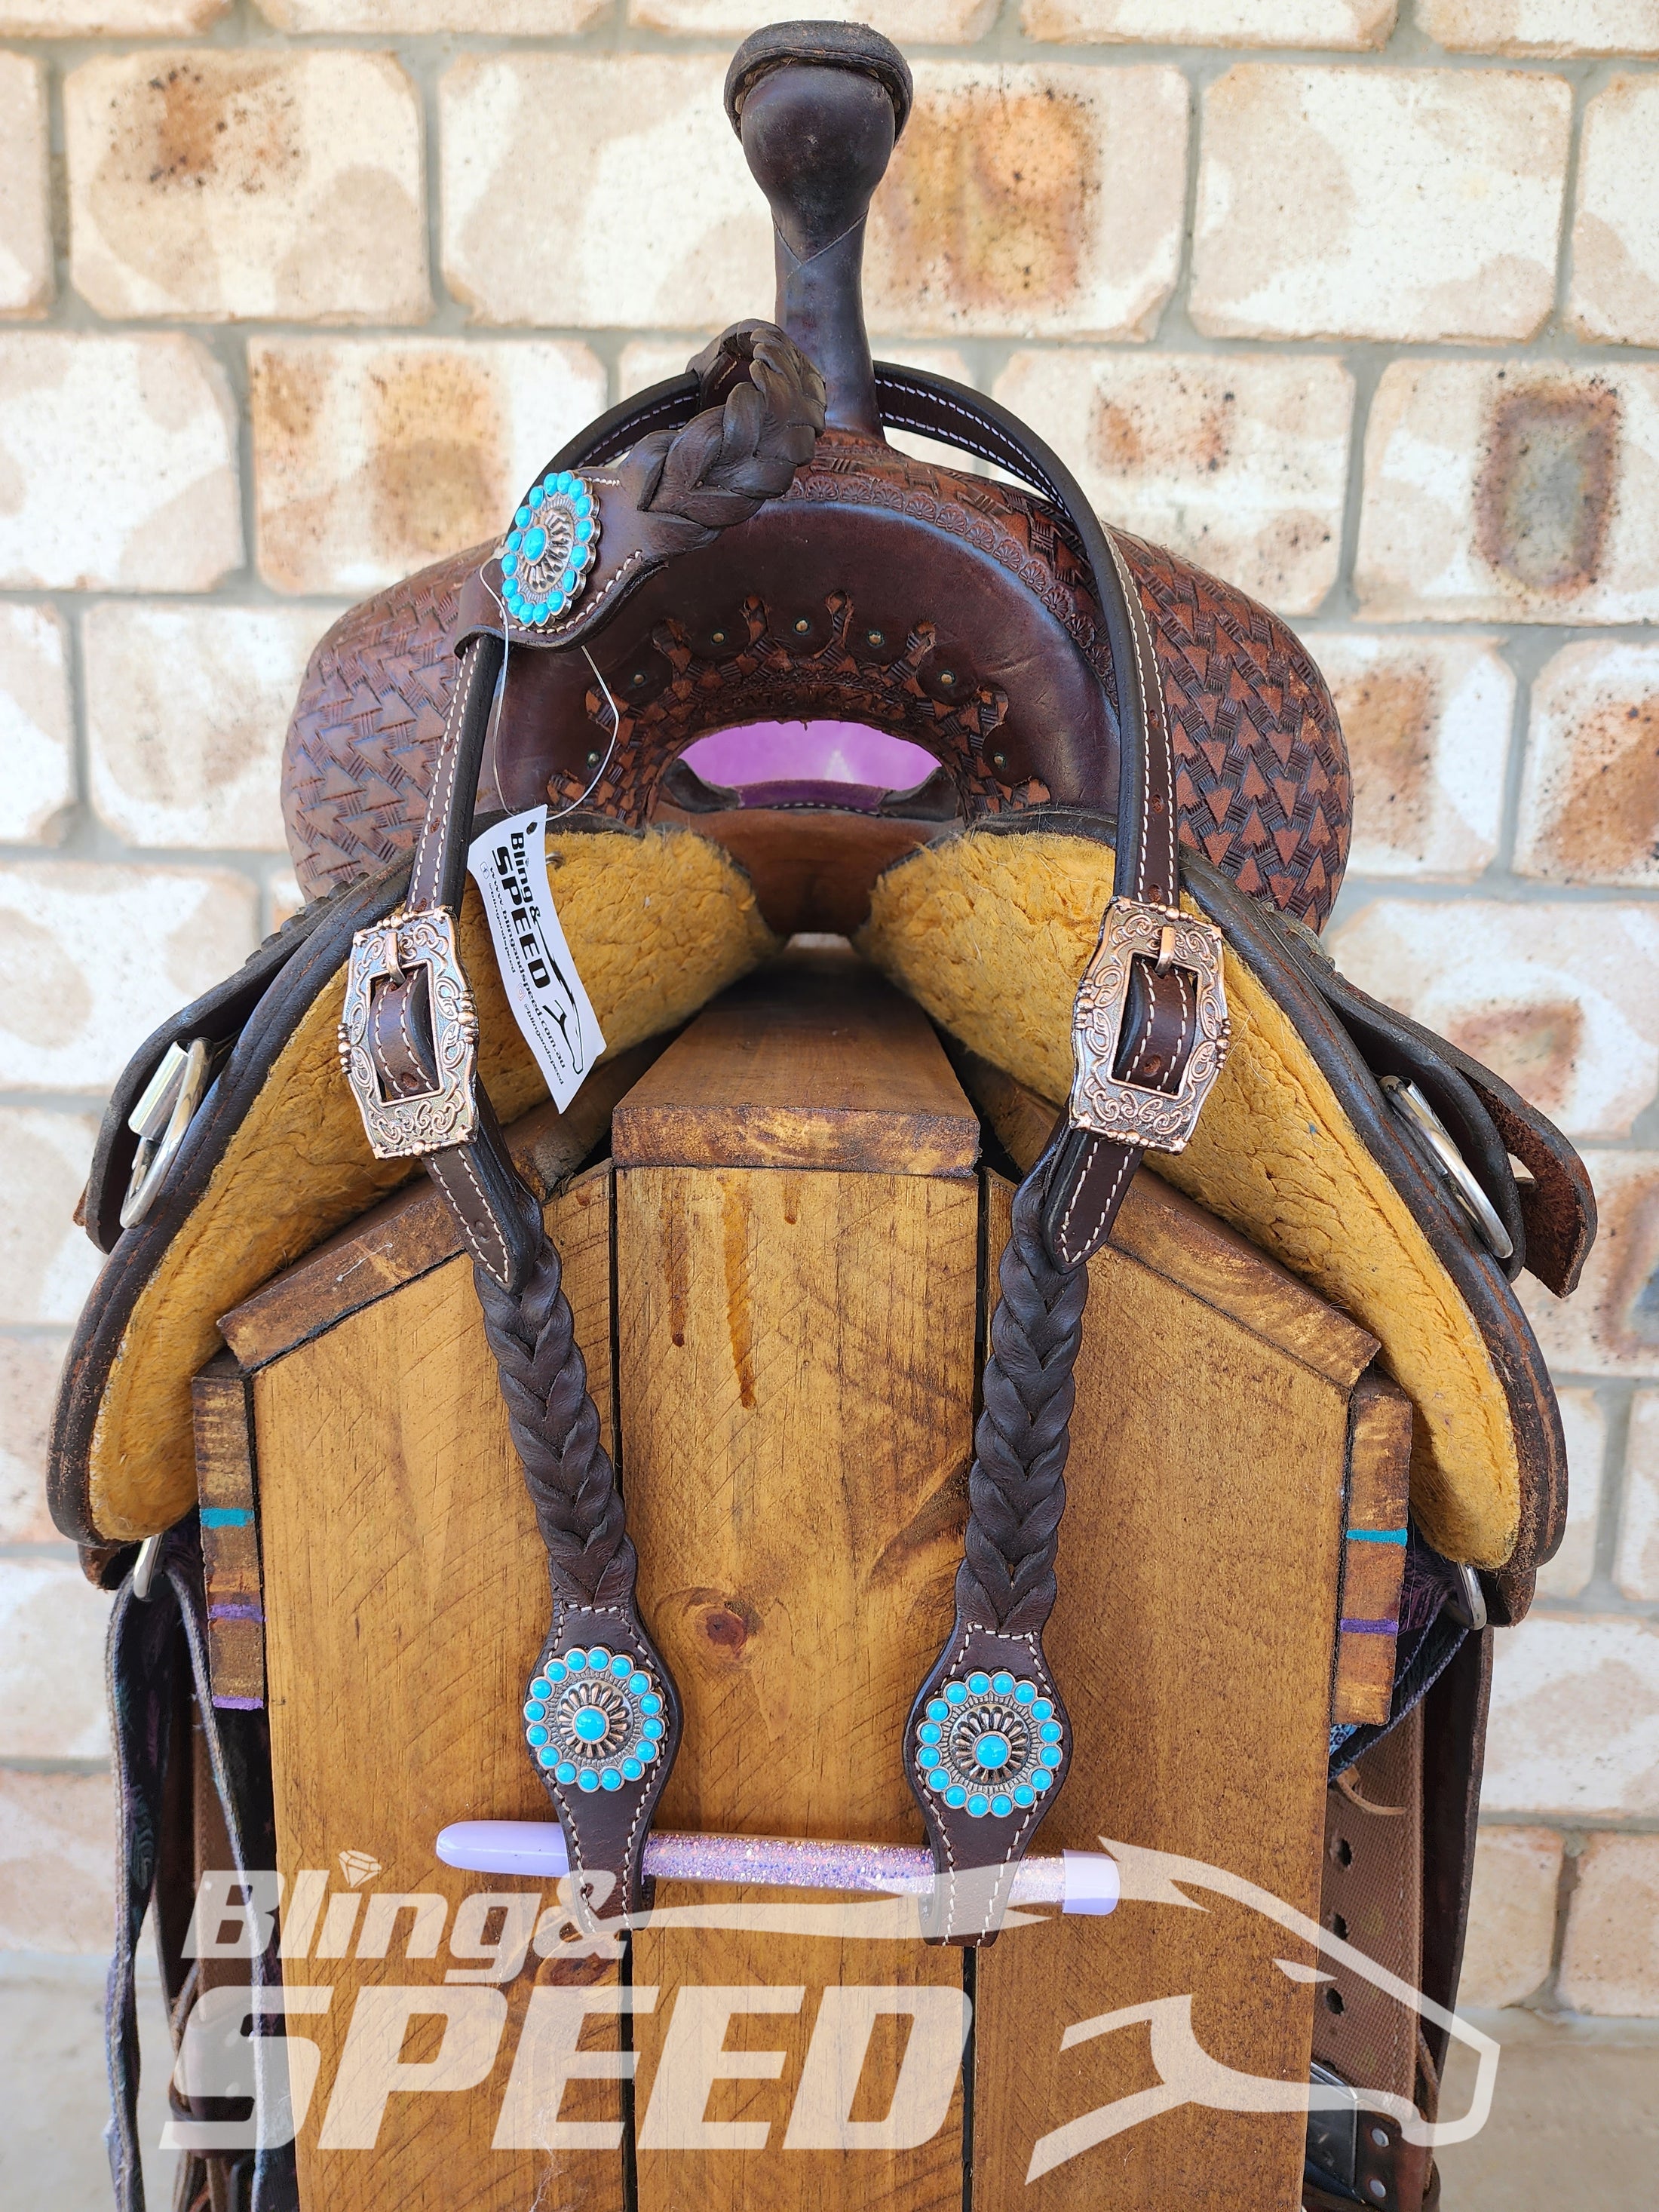 Bling & Speed Plait One Ear Bridle with Turquoise (7897865683182)